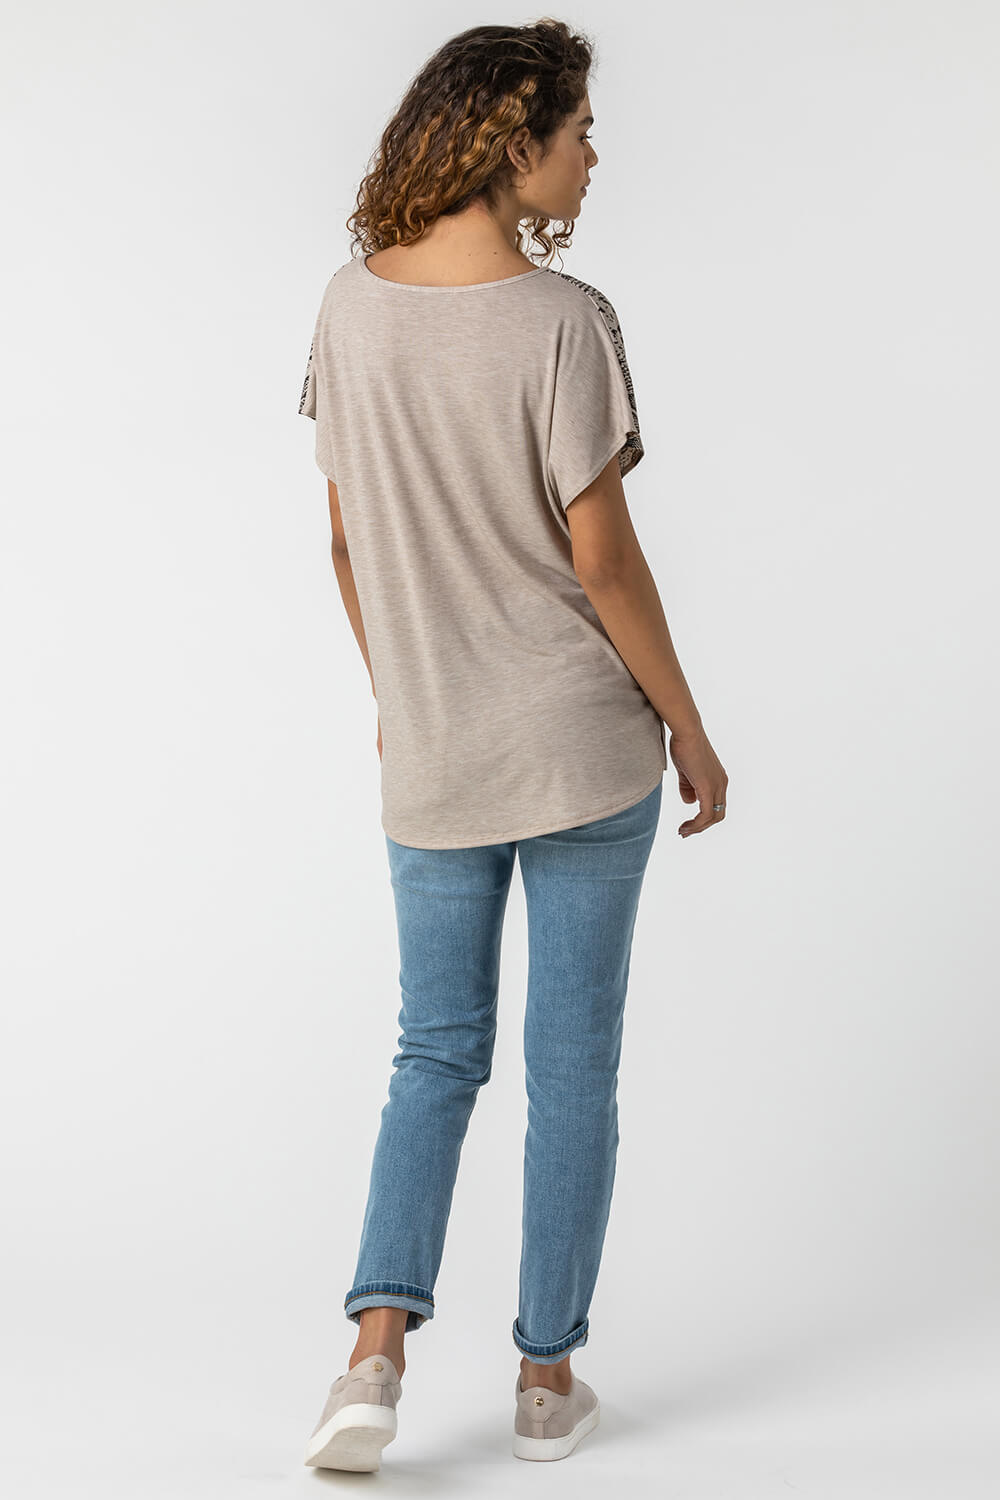 Neutral Snake Print Ombre Top, Image 2 of 5